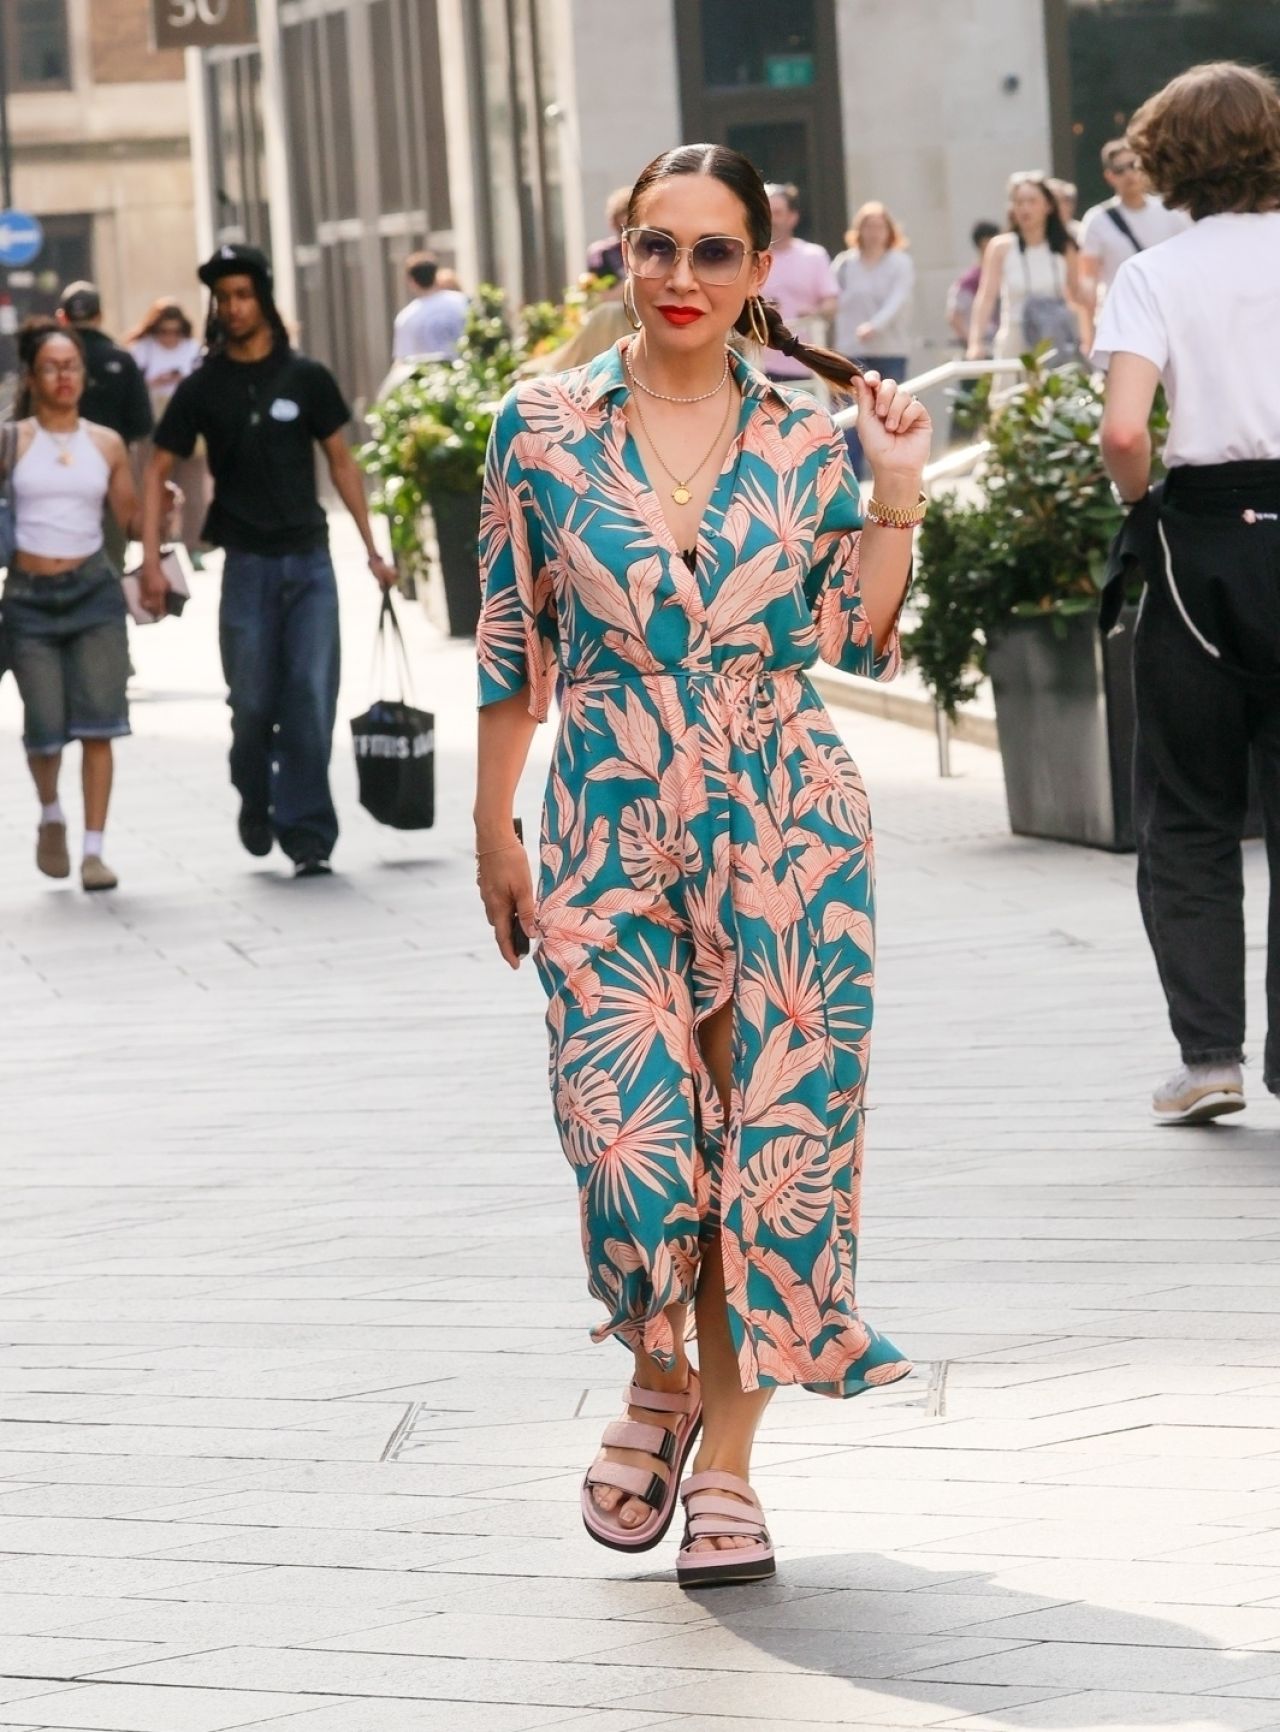 MYLEENE KLASS WEARING A FLORAL DRESS AND SANDALS IN LONDON